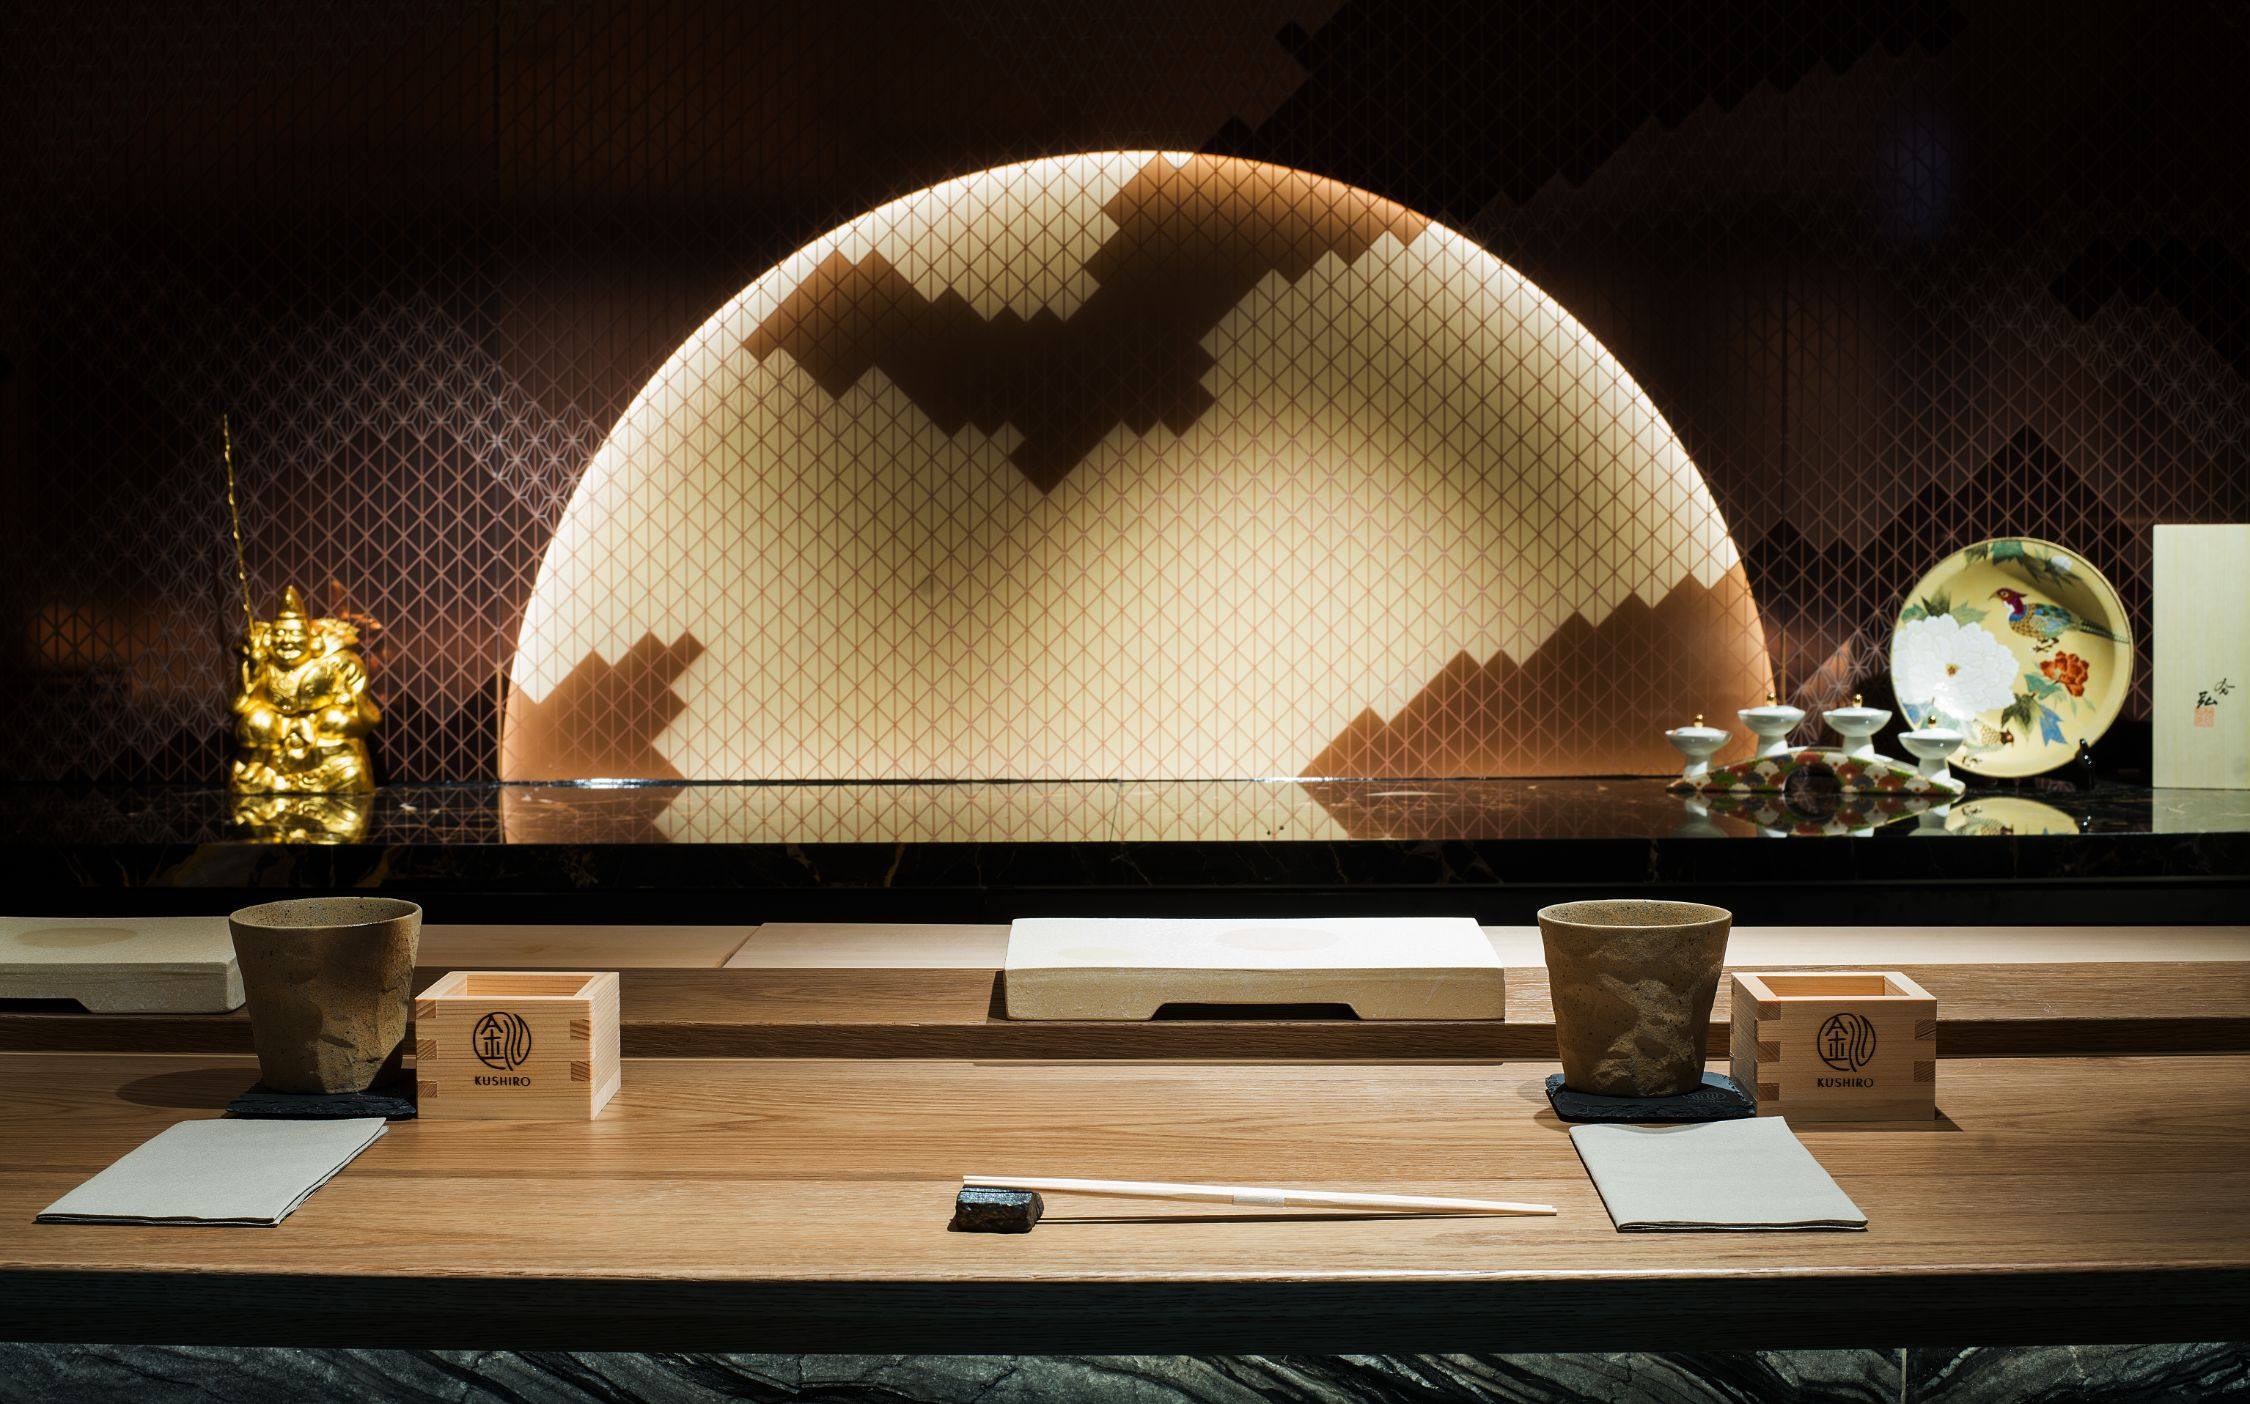 Using the concept of hua chao yue xi, Kushiro’s design combines Japanese garden style interior with images of different moon phases. Photo: Kushiro